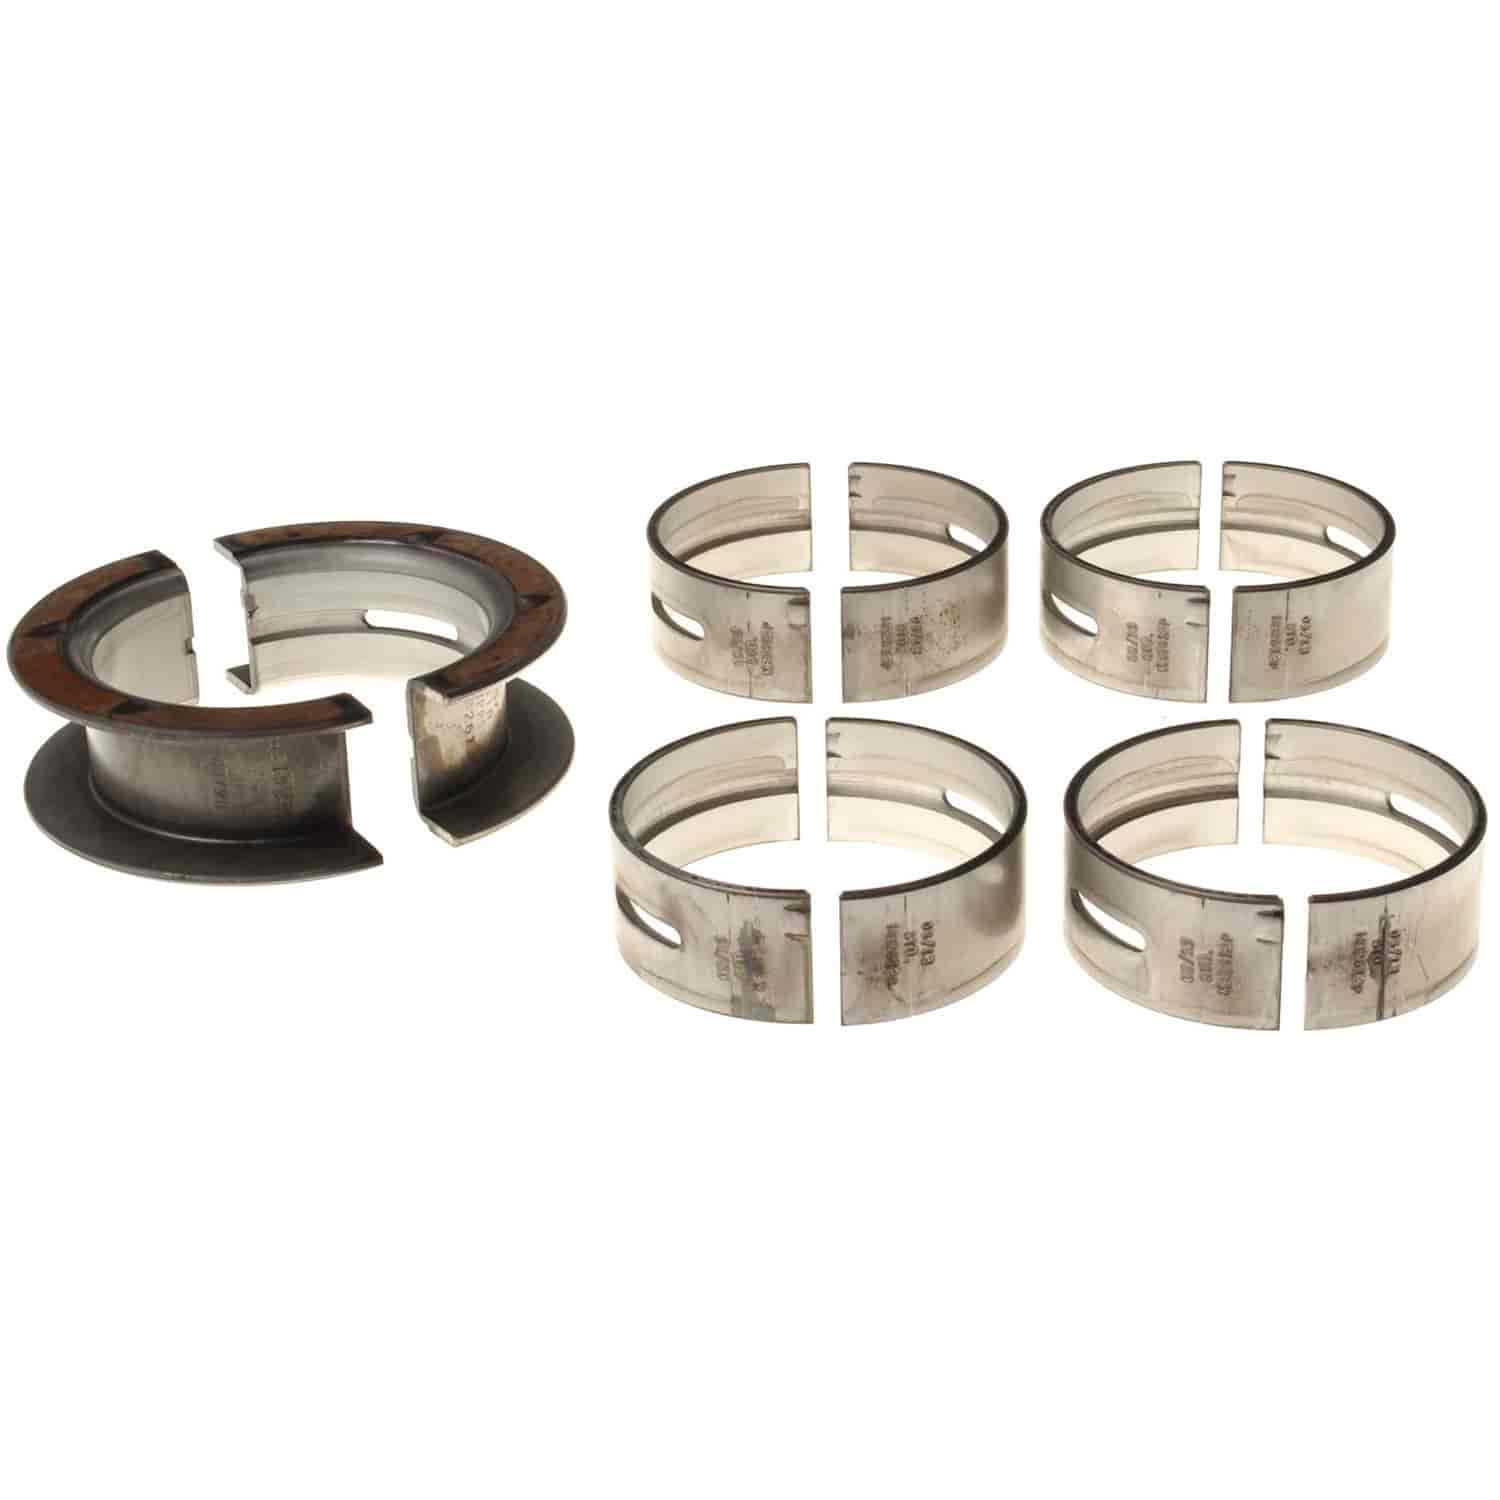 Main Bearing Set Ford 1974-1997 L4 2.0/2.3L with Standard Size